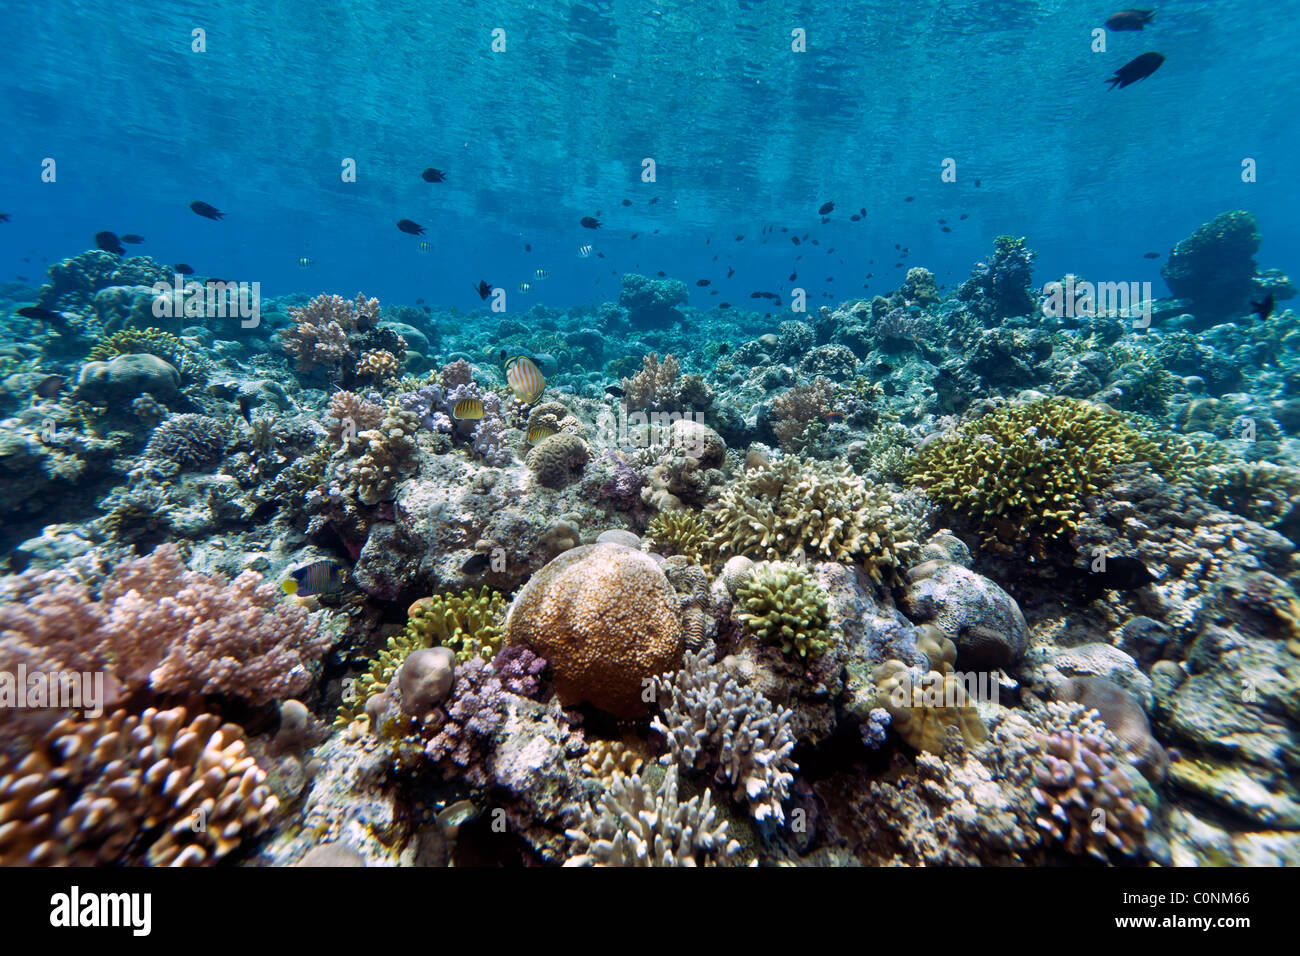 Coral gardens off the coast of Bunaken island in North Sulawesi, Indonesia Stock Photo